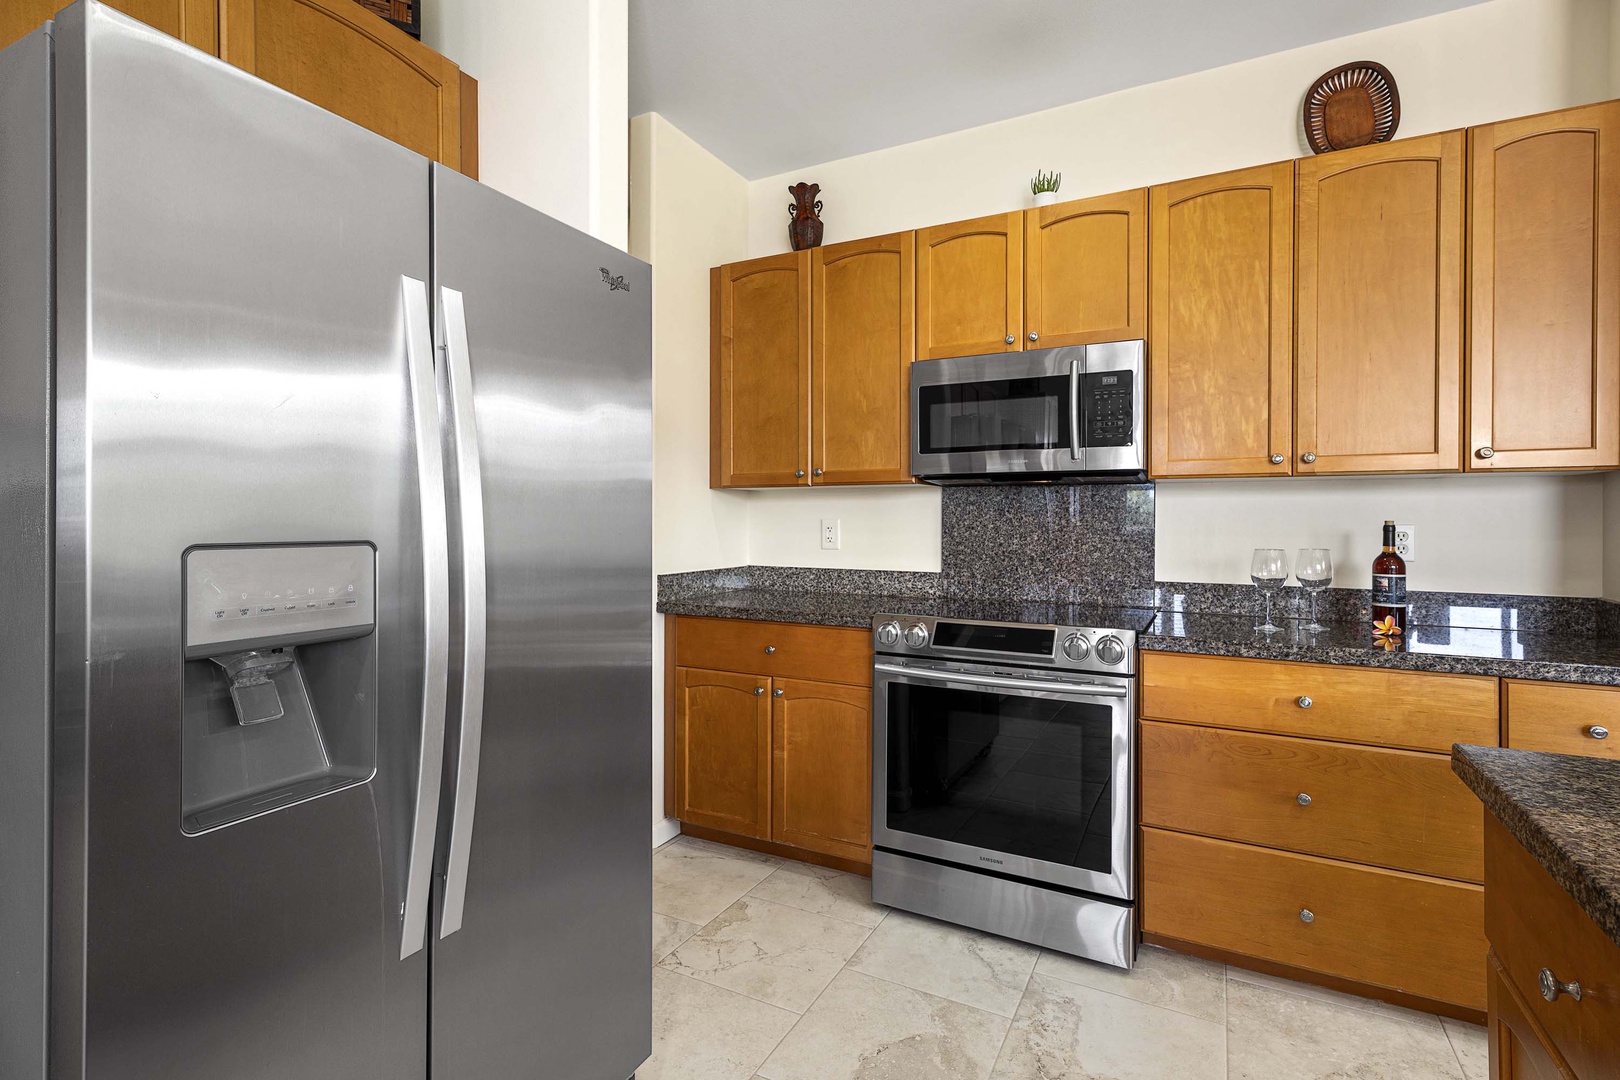 Kailua Kona Vacation Rentals, Kahakai Estates Hale - Savor culinary adventures in our fully-stocked kitchen with ample appliances and tools.